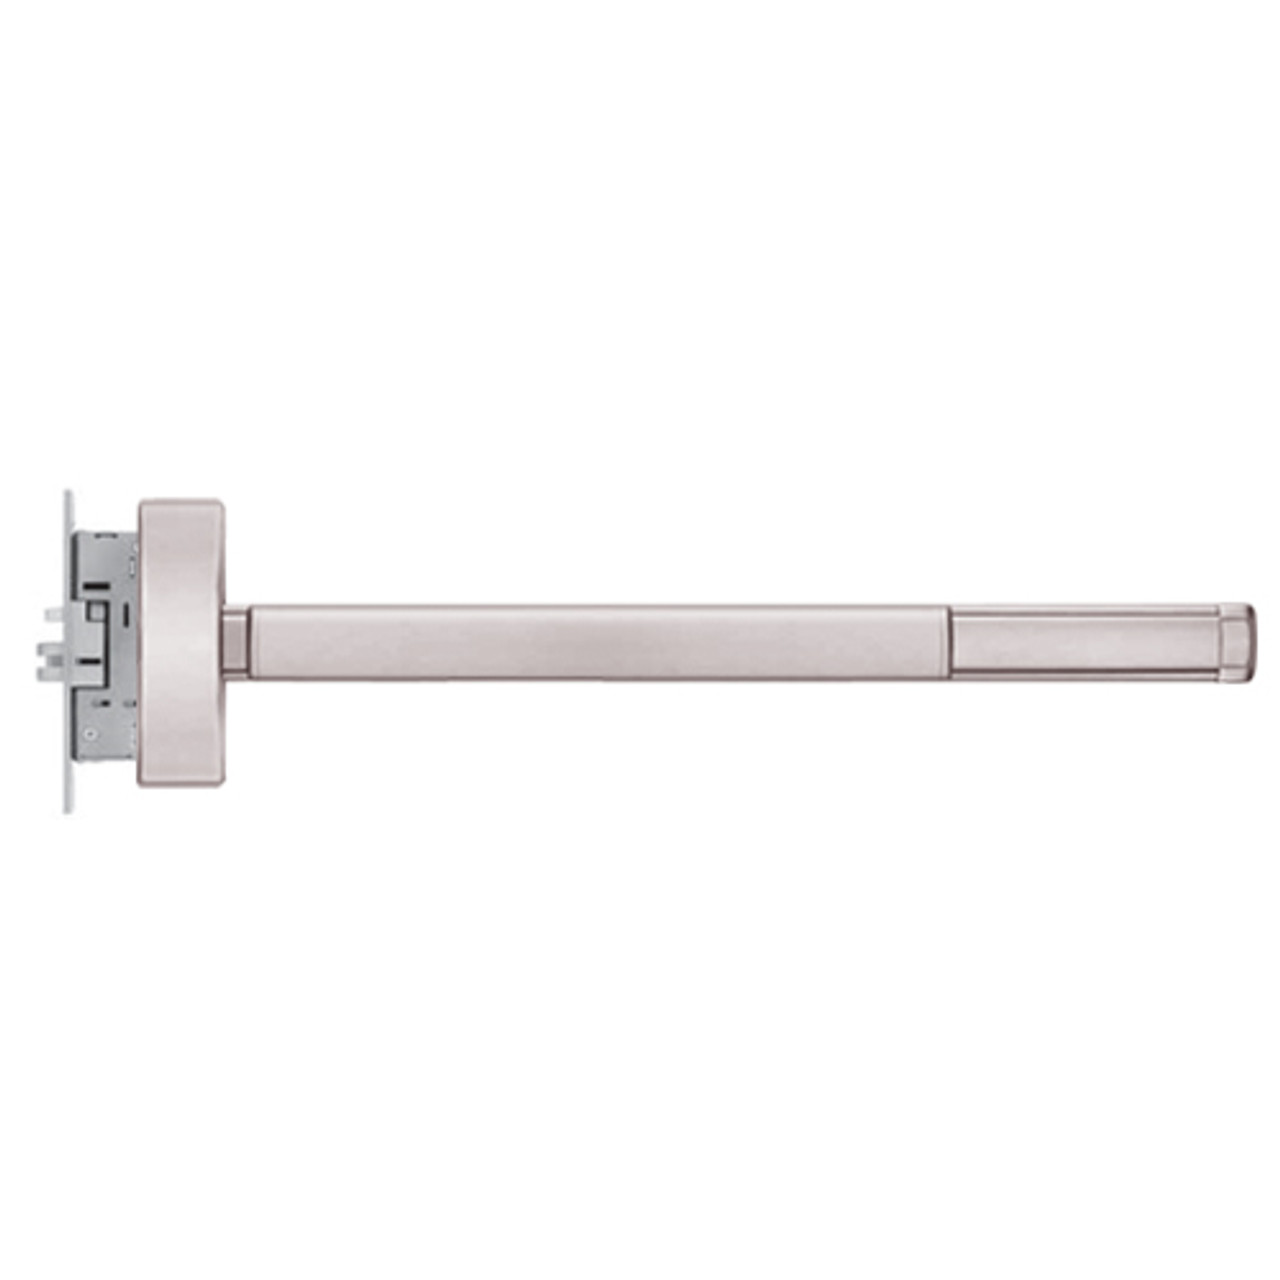 MLR2305-LHR-628-48 PHI 2300 Series Apex Mortise Exit Device with Motorized Latch Retraction Prepped for Key Controls Thumb Piece in Satin Aluminum Finish